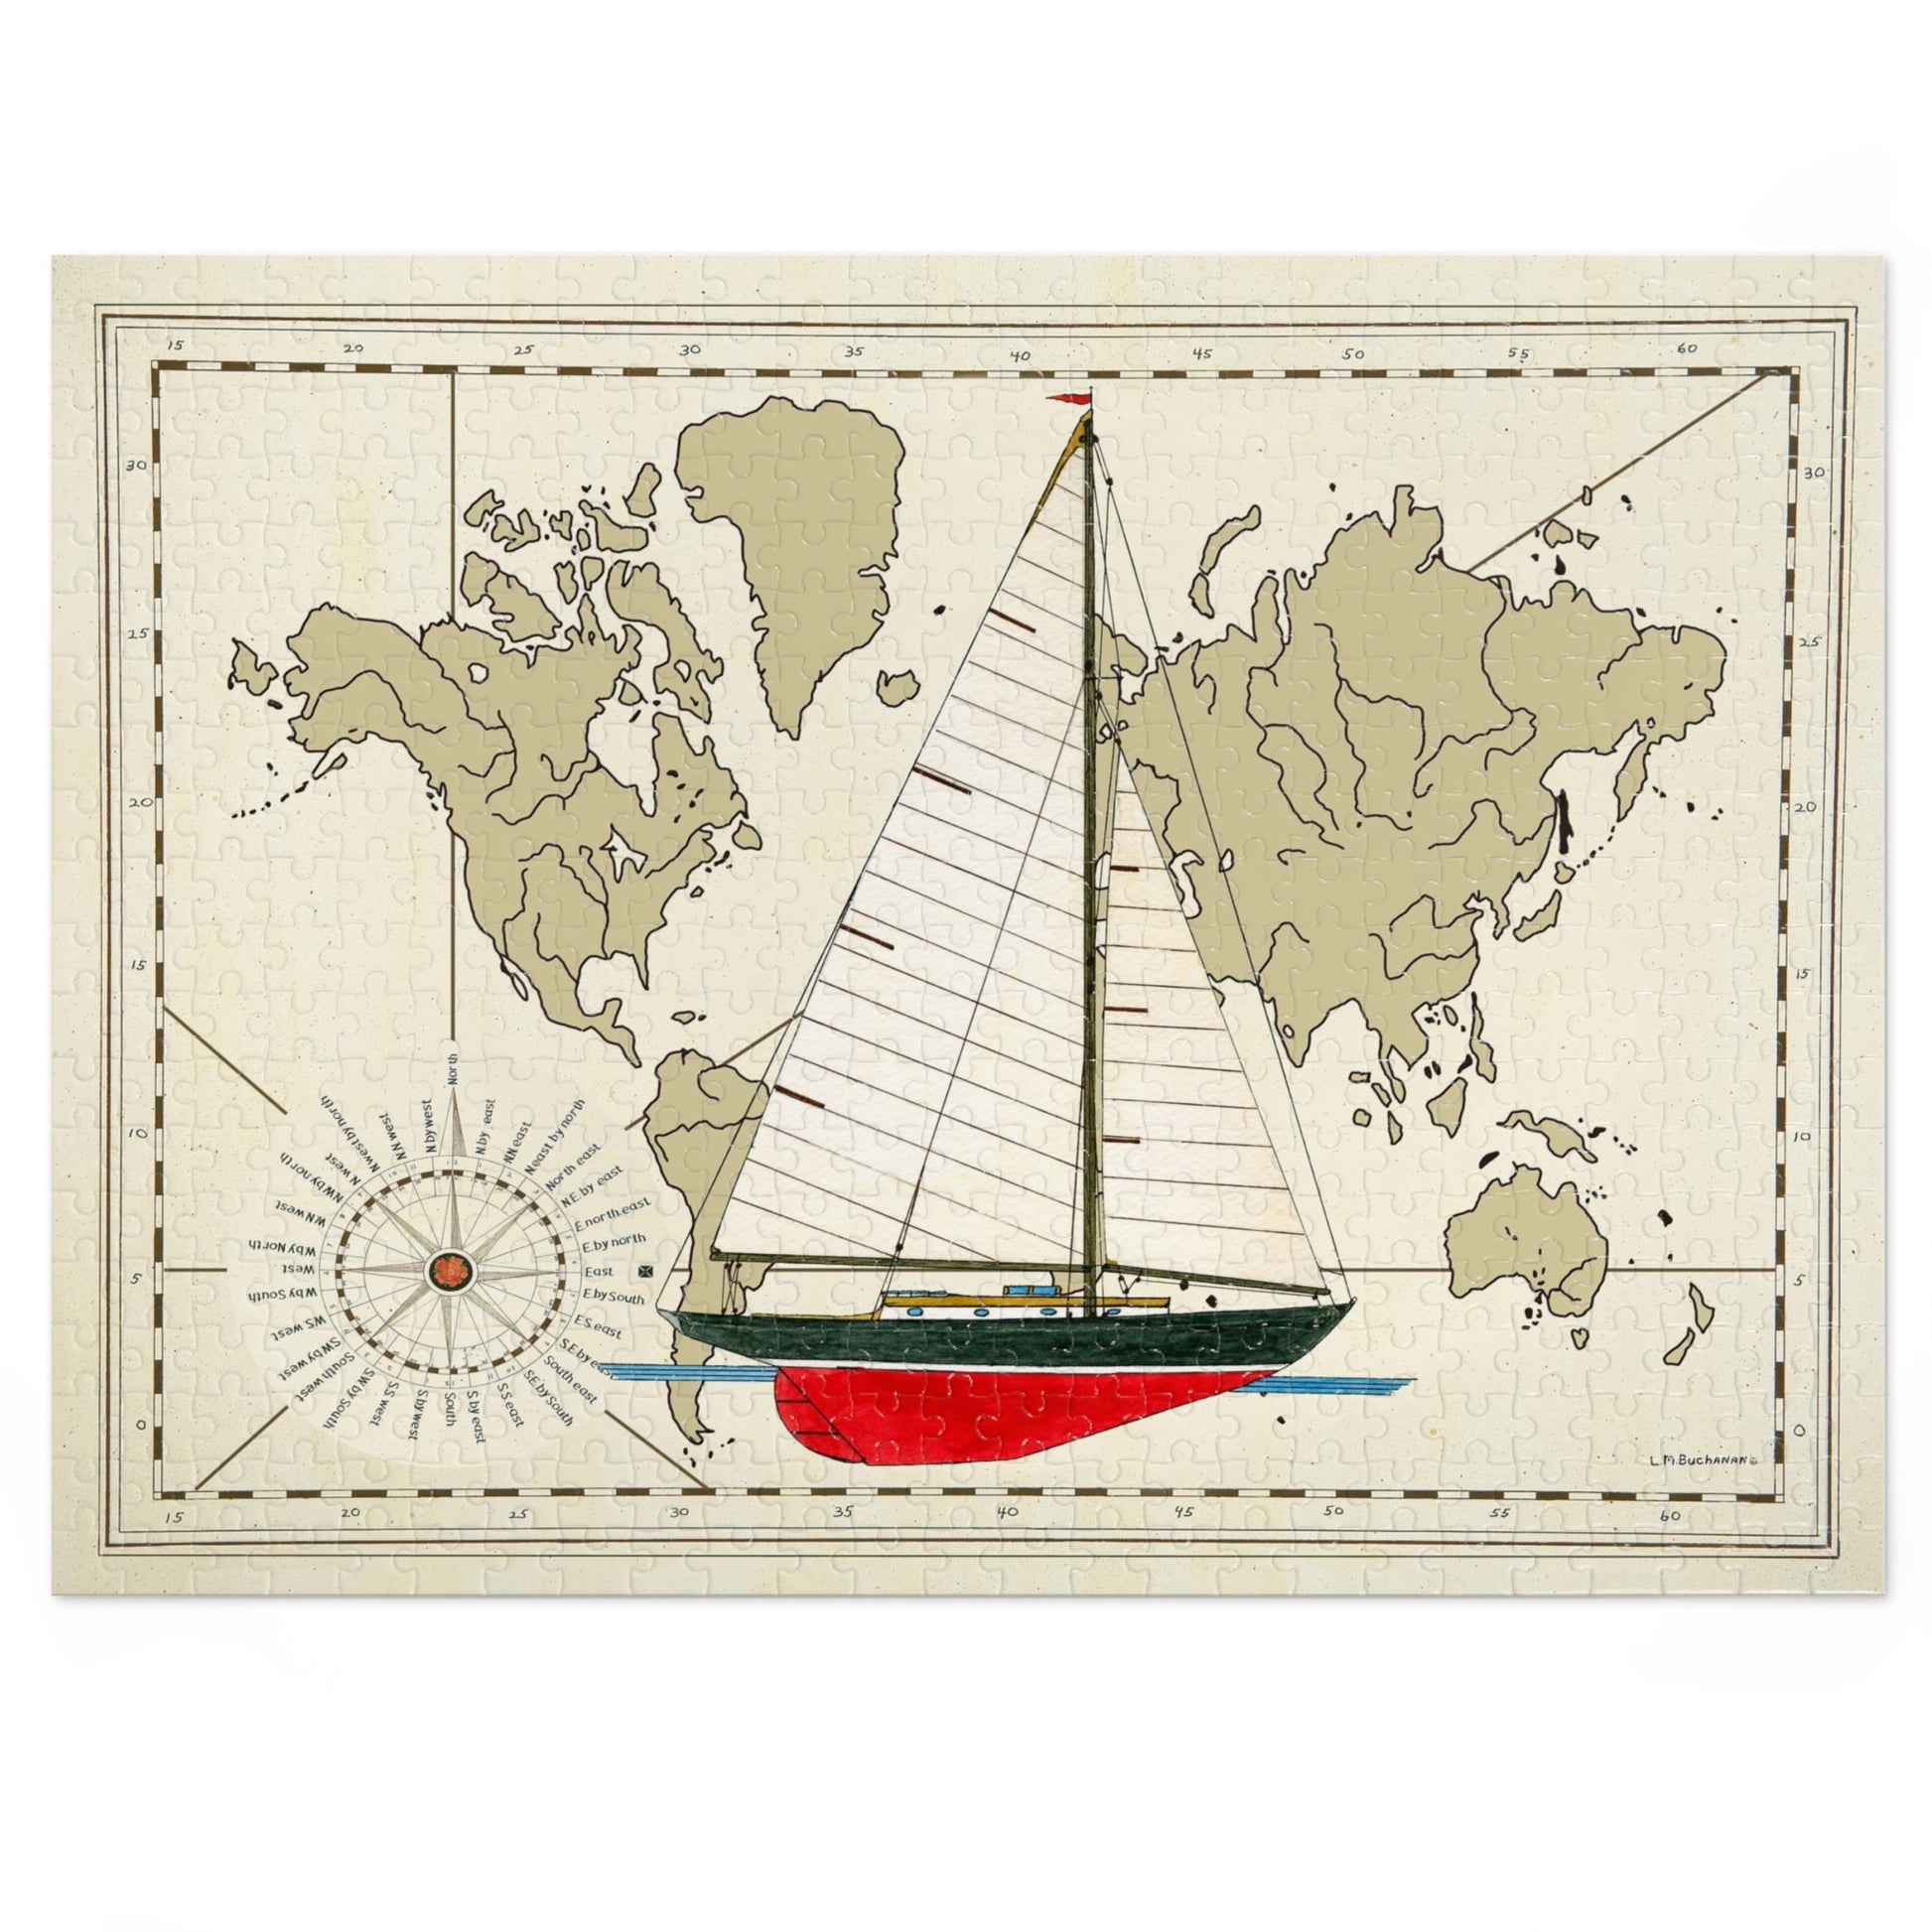 If you love sailing, history and maps, this attractive 500 piece puzzle is perfect for family fun or as a gift. The puzzle design is by artist Lee M. Buchanan and features Twilight, a cruising racing sloop with the pleasing profile typical of those built in the 1930's. A world map is in the background. The puzzle ships in a gift-ready metal box for a show-stopping presentation.